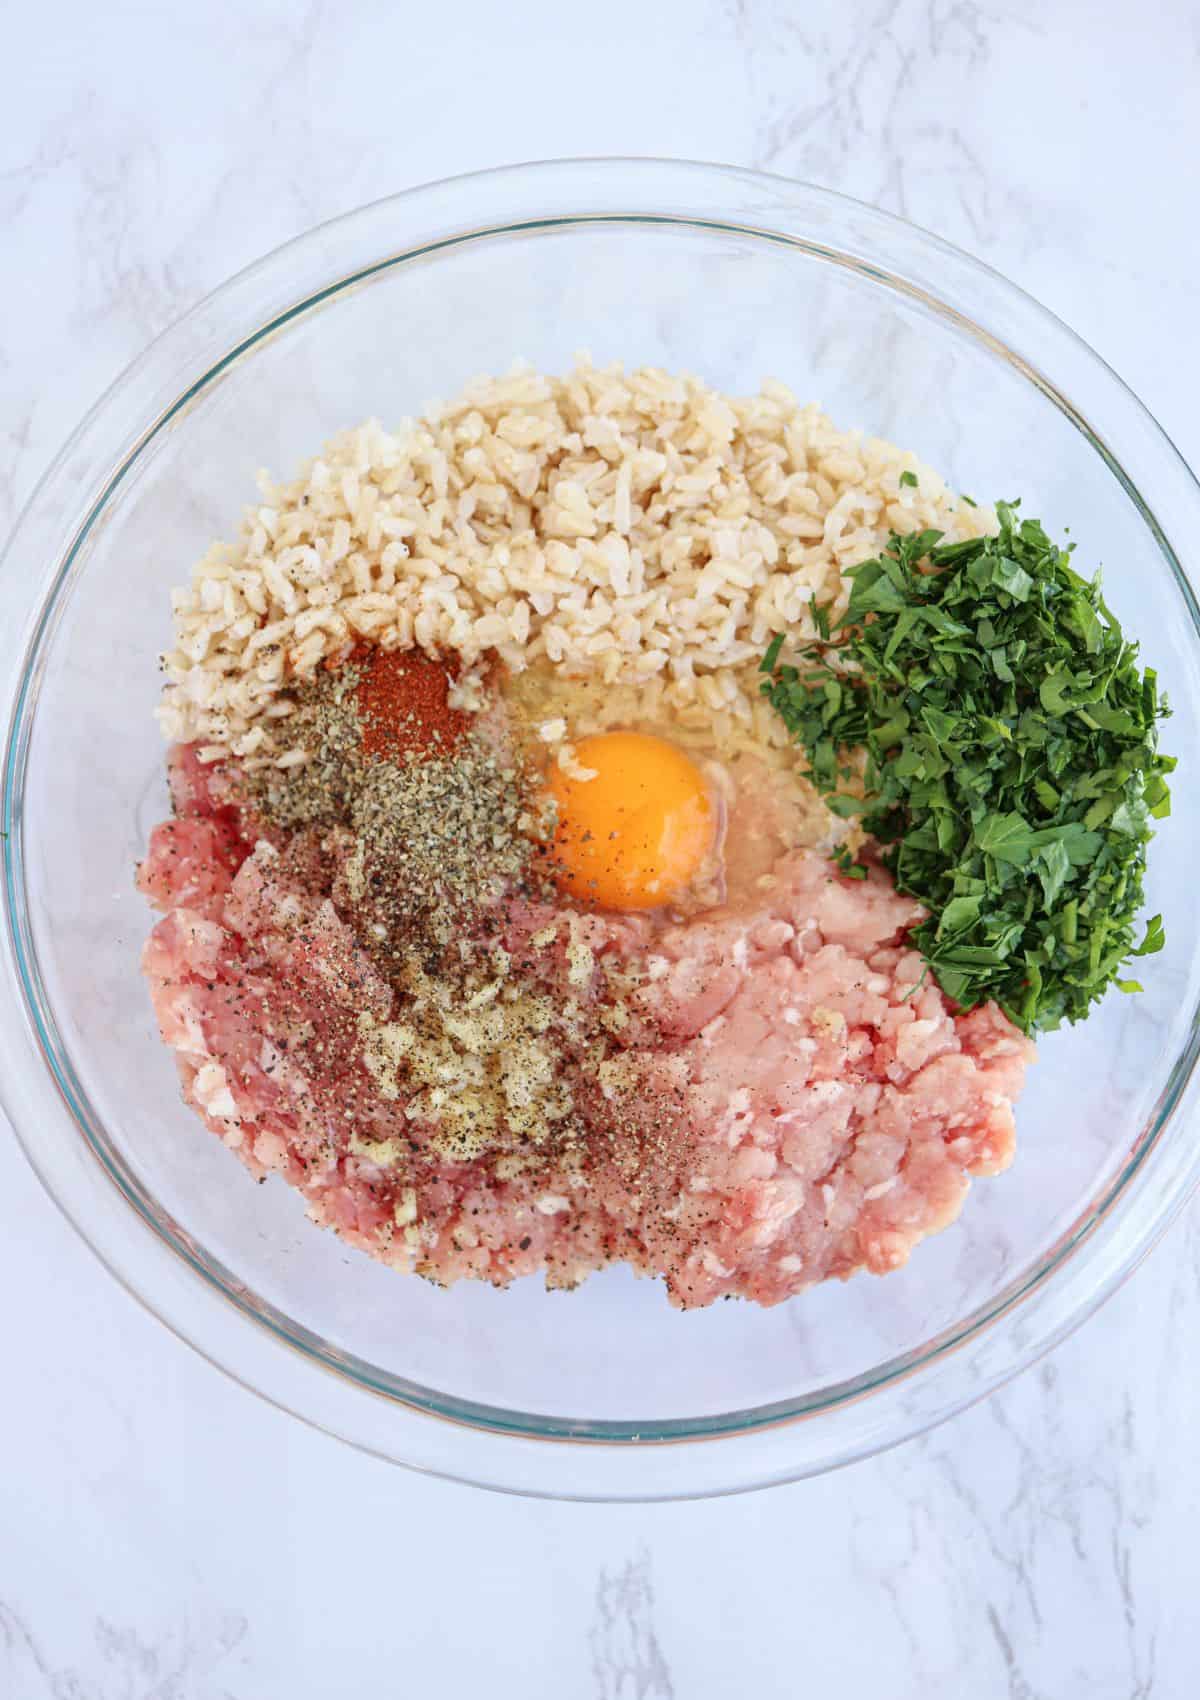 ground pork, ehh, spices and herbs in a glass bowl.